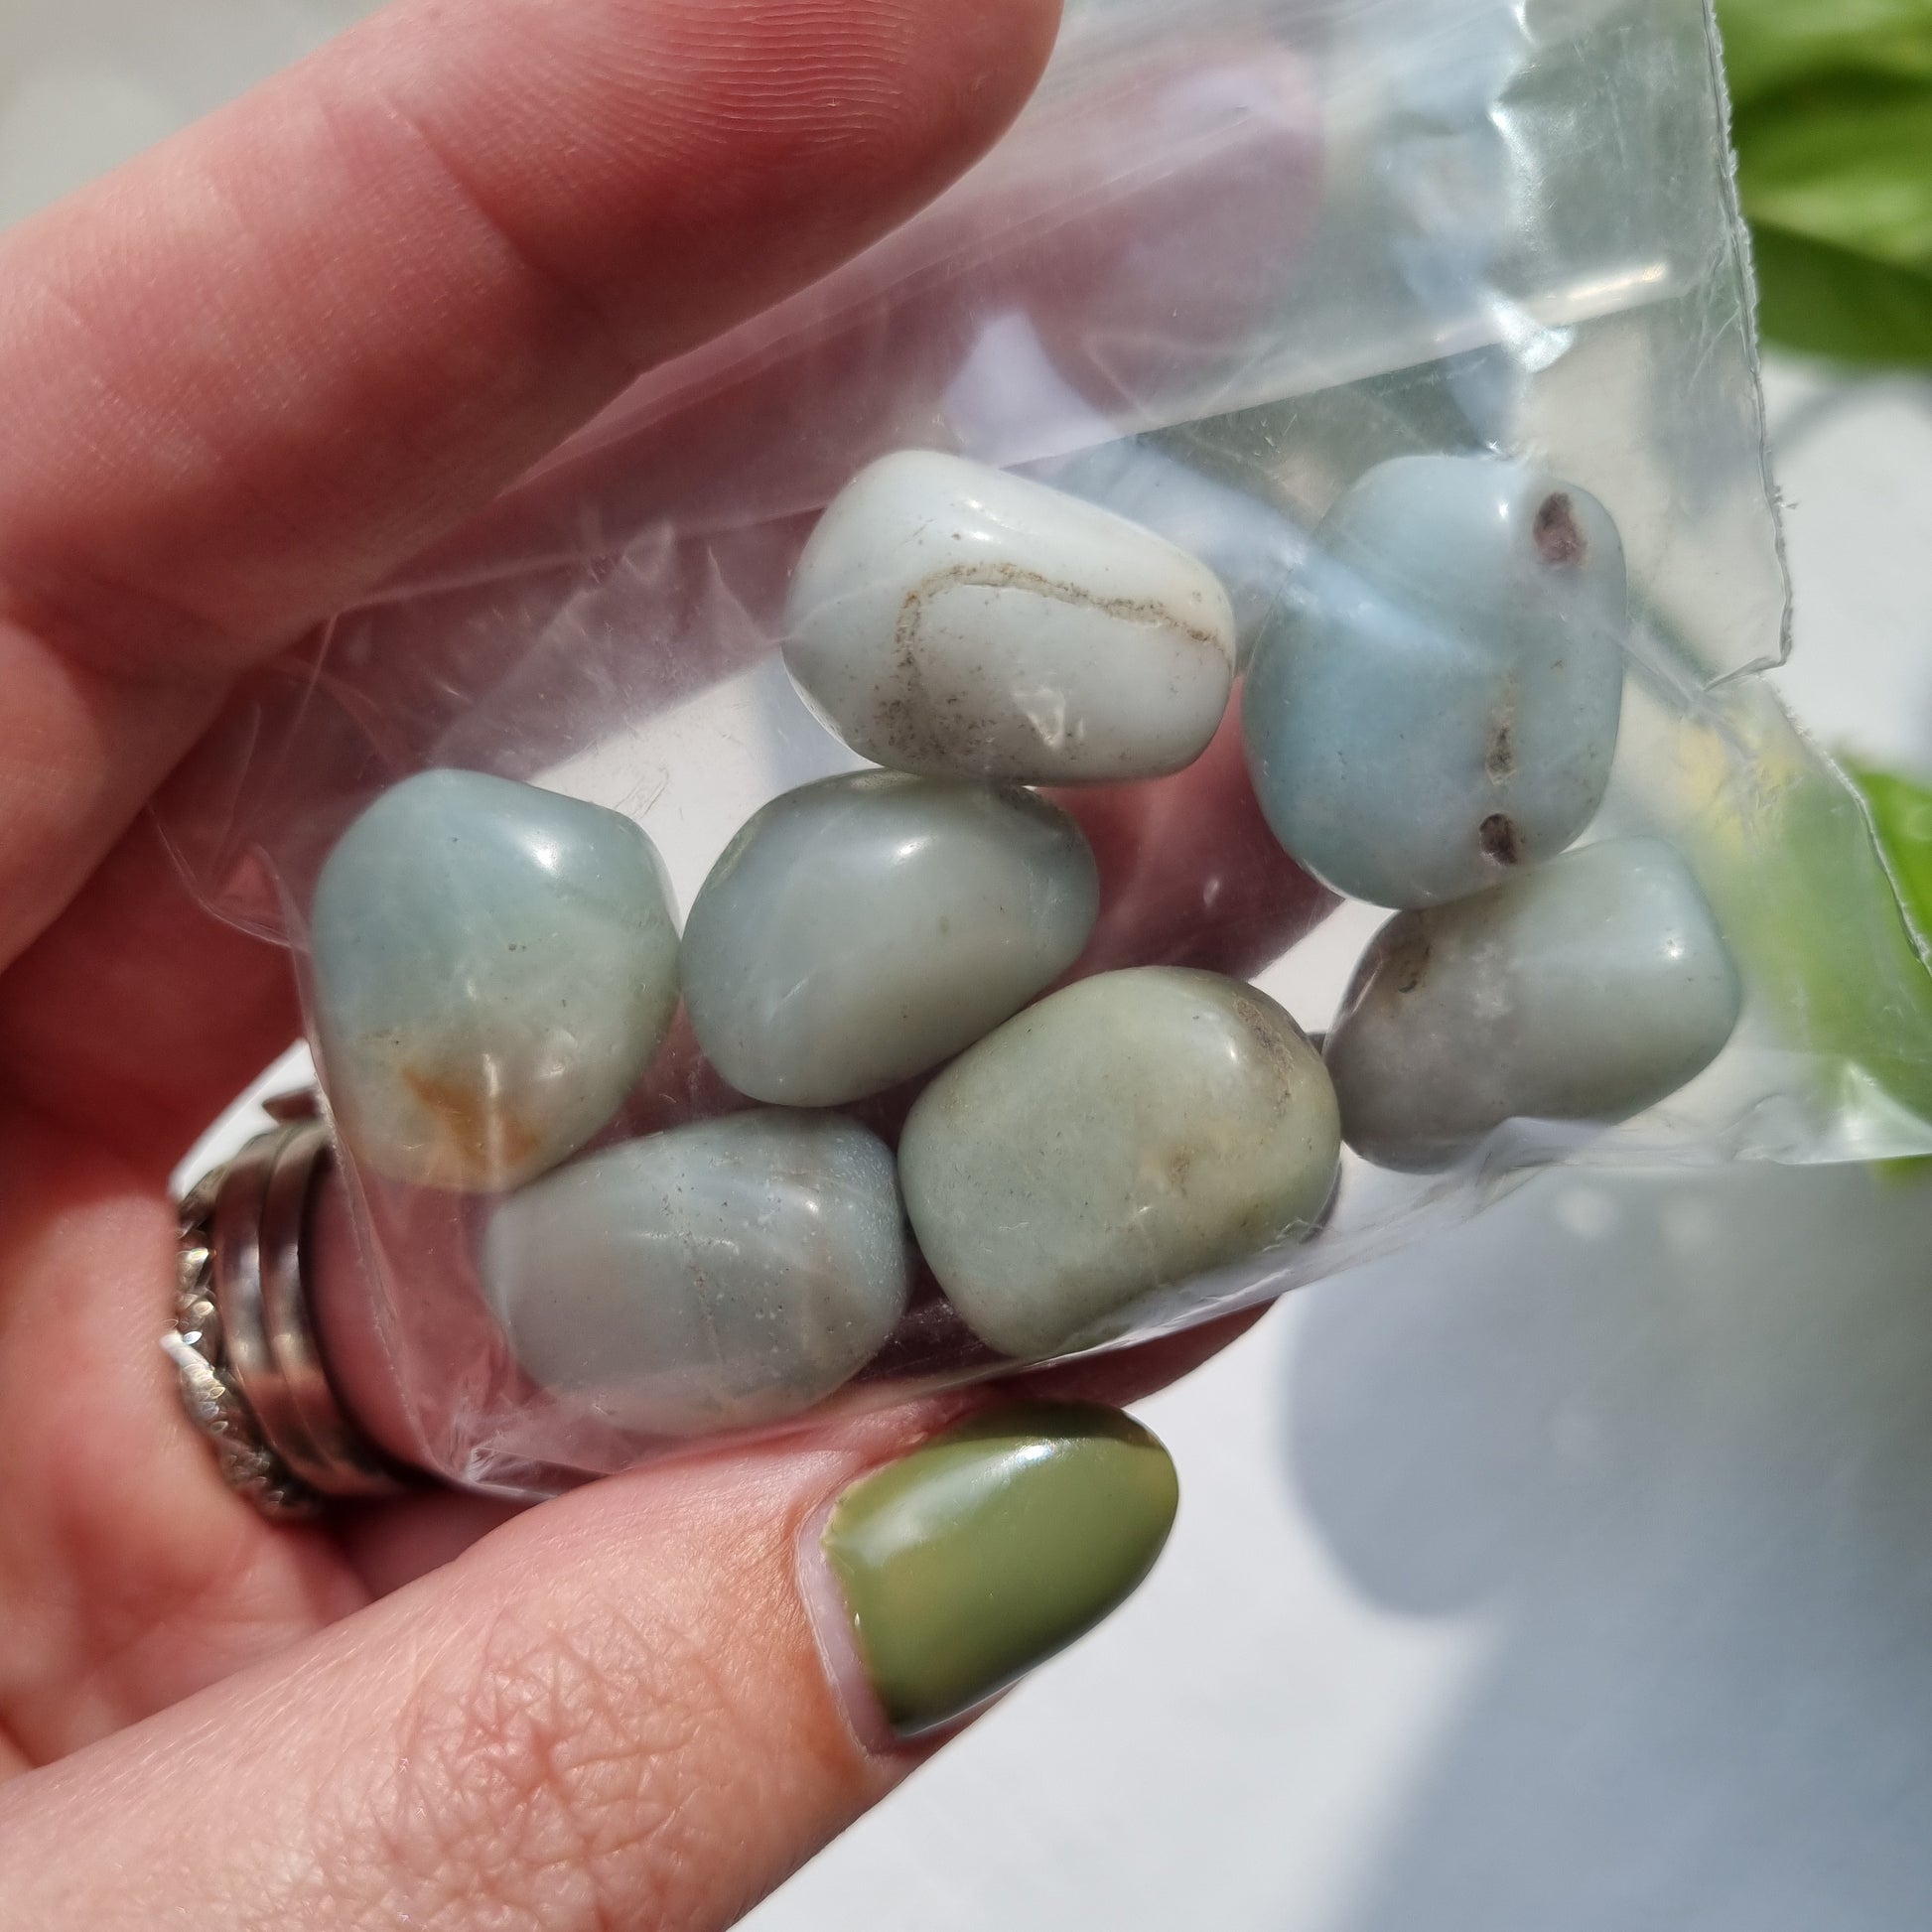 Amazonite Beads - 17-20mm - Sparrow and Fox